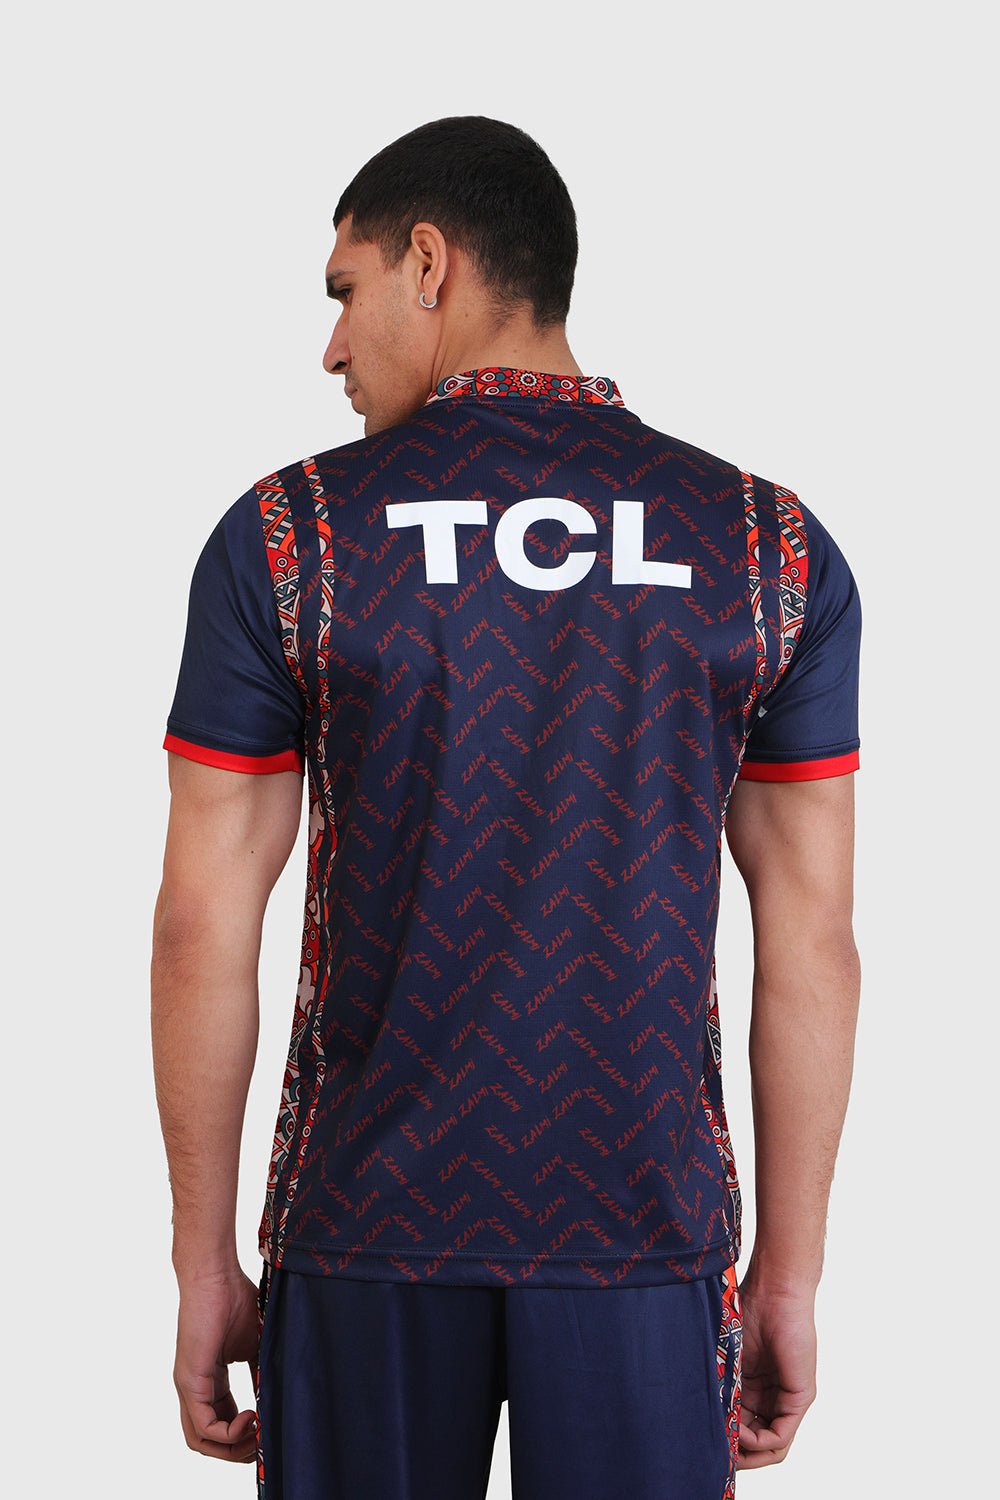 Official PSL 8 Premium Match Day's Training Jersey